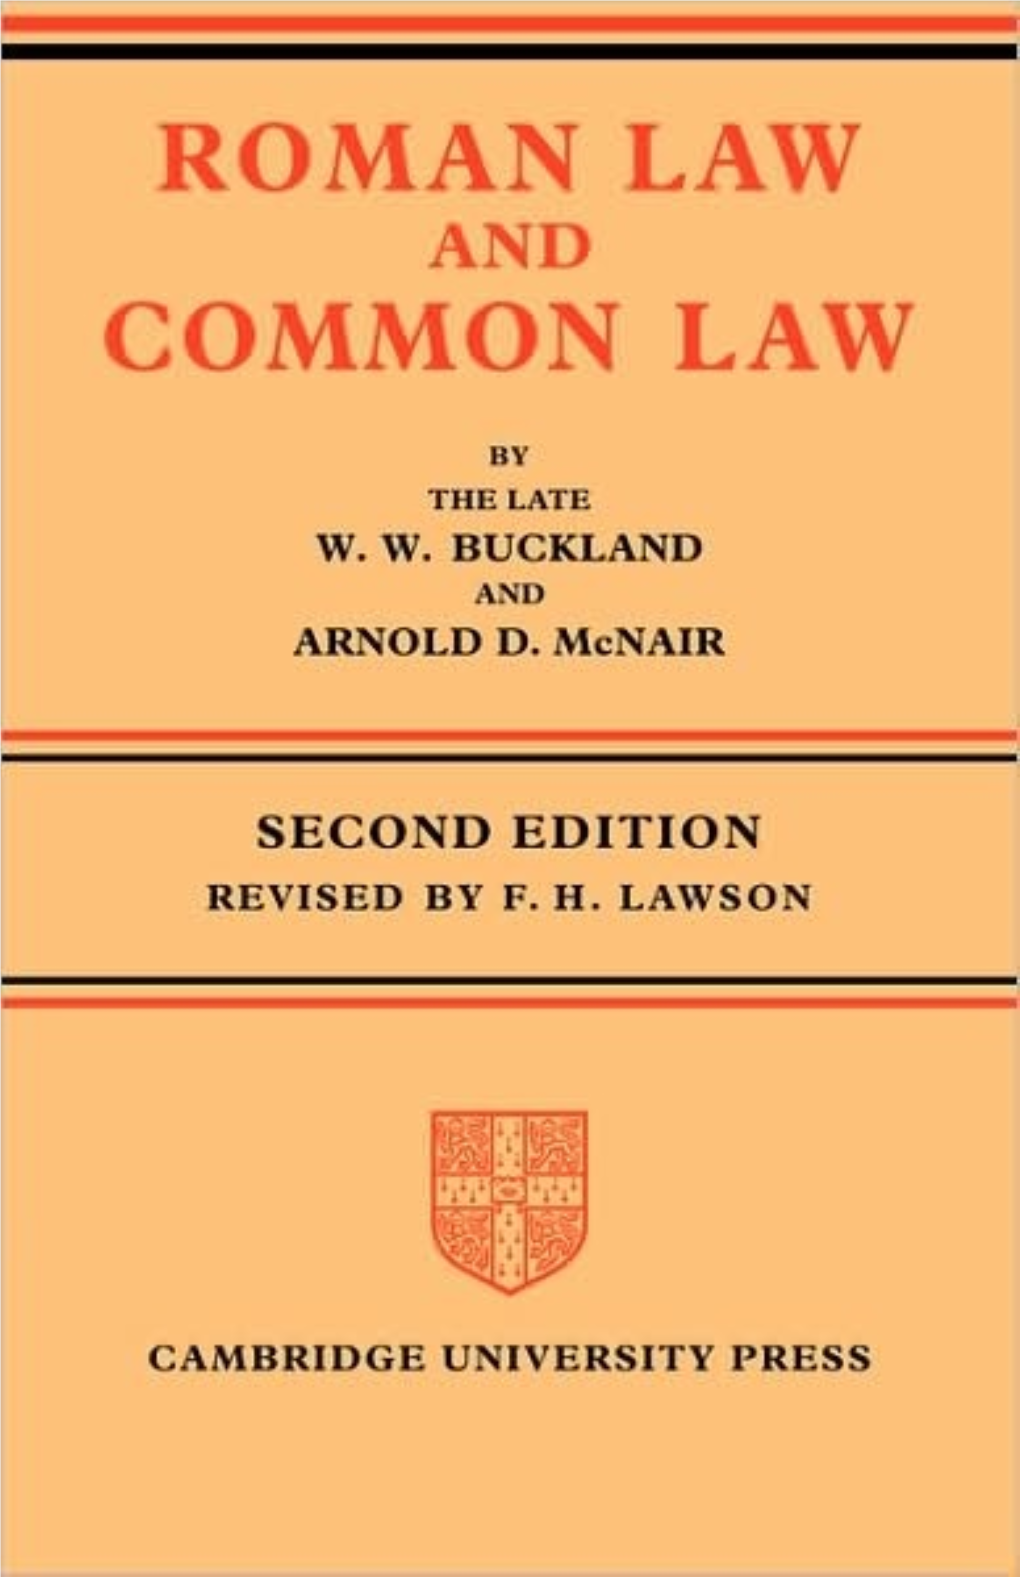 Roman Law and Common Law : Comparative Outline